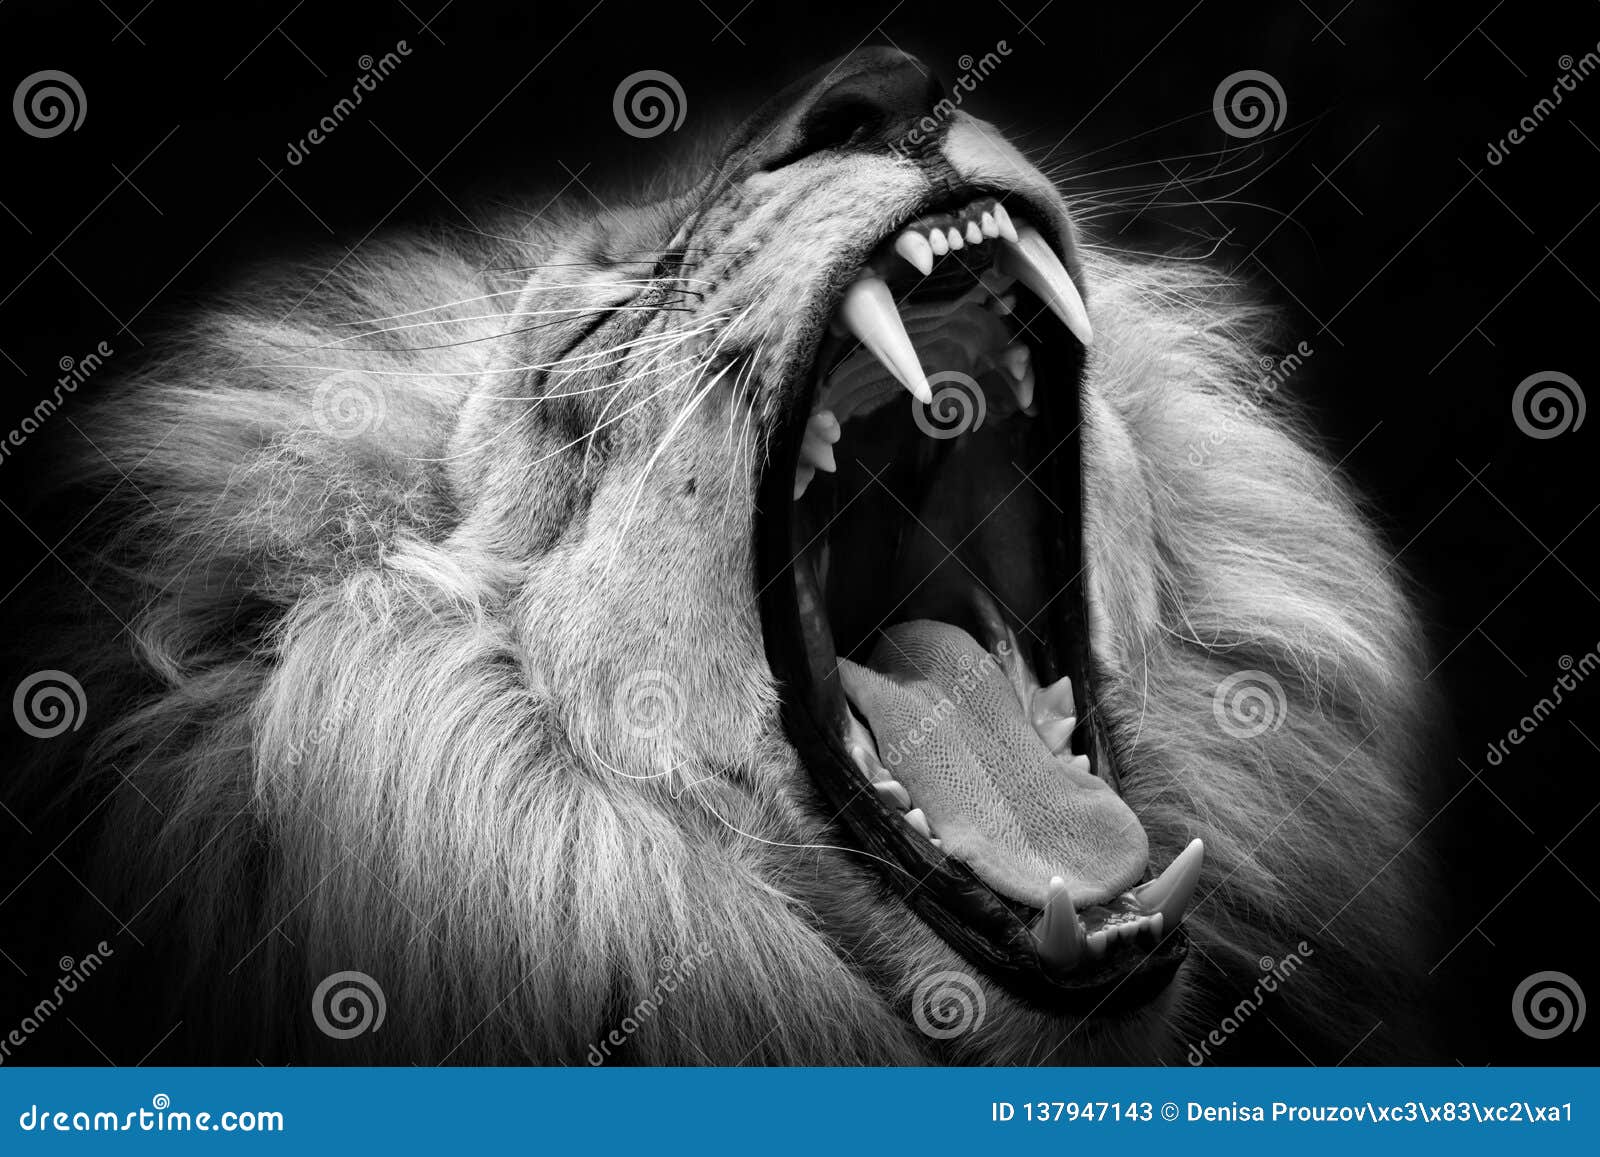 Black And White Lion With Open Mouth Stock Image Image Of